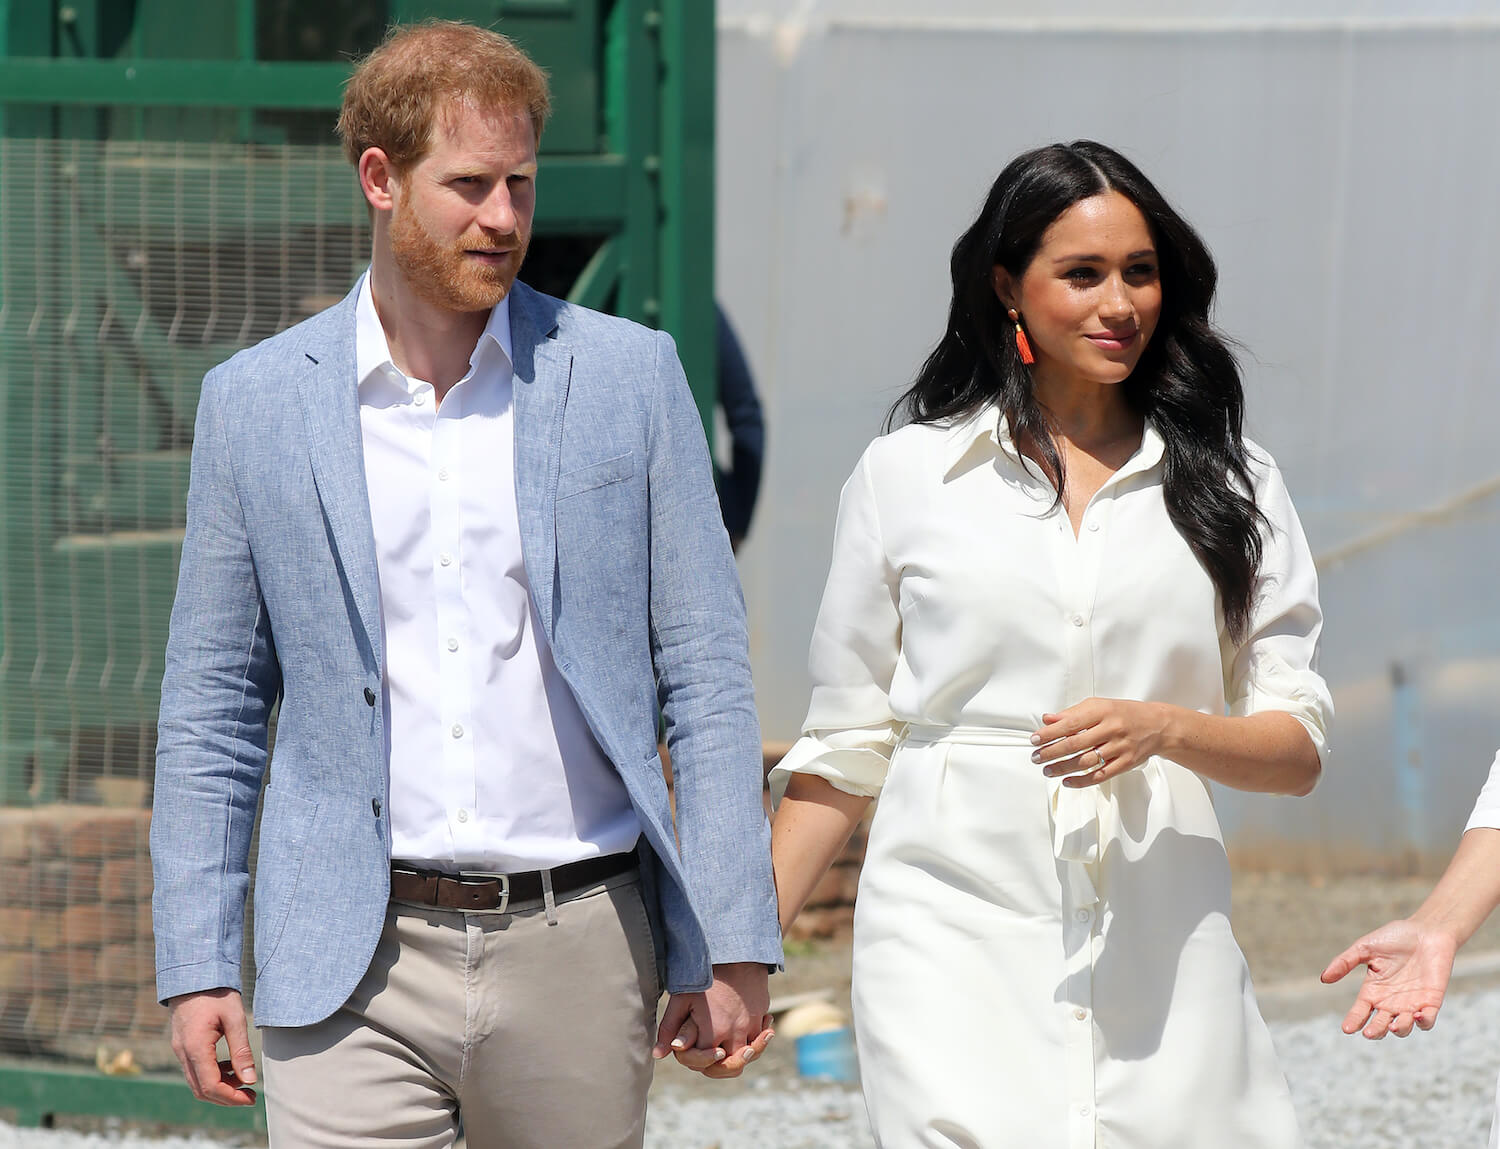 Prince Harry wears a light blue jacket and holds hands with Meghan Markle, wearing a white dress